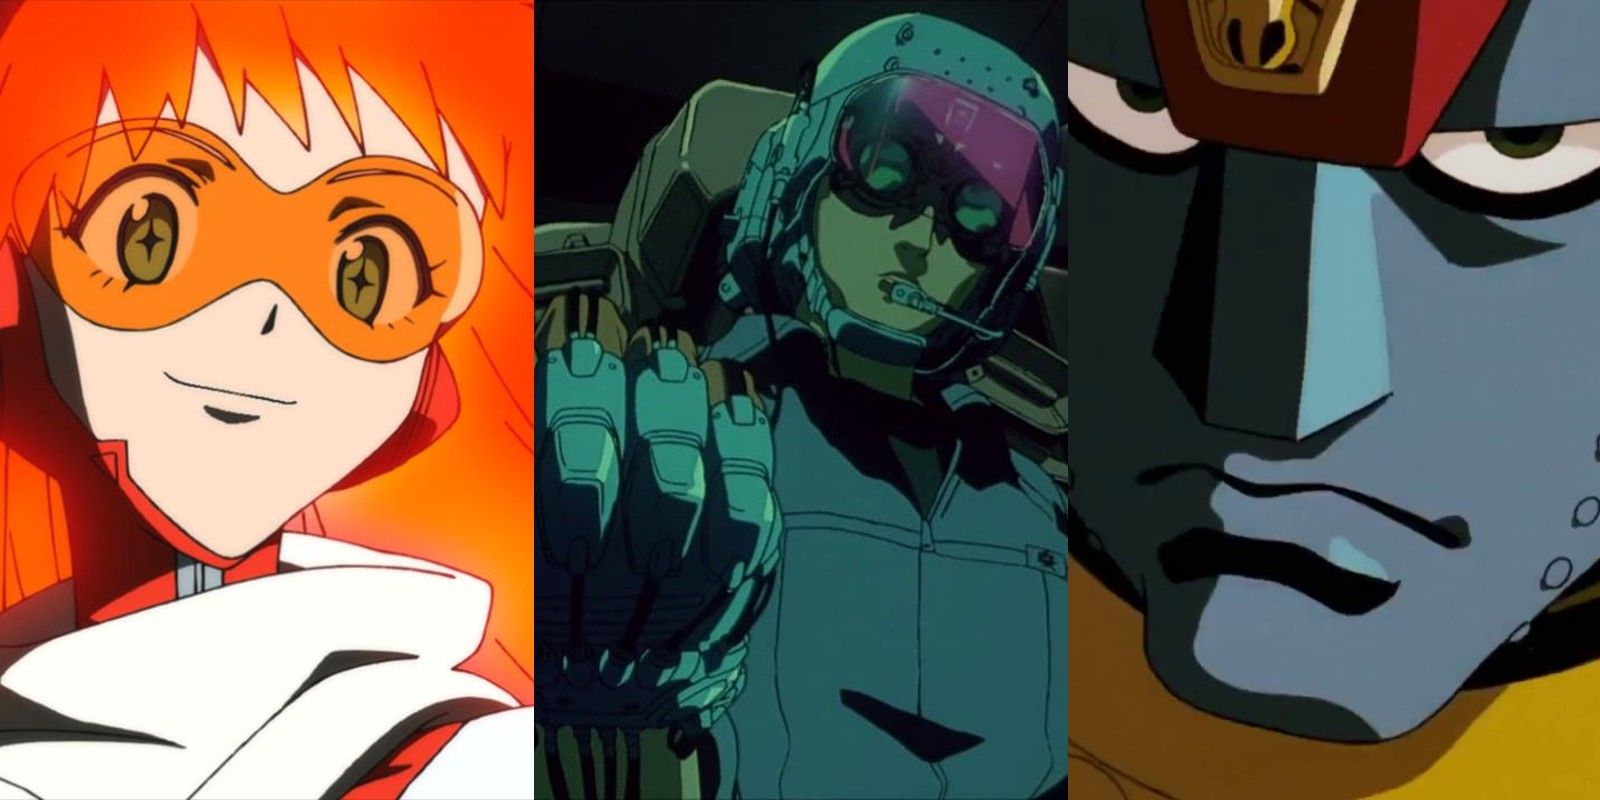 Diebuster, Patlabor 2, and Giant Robo